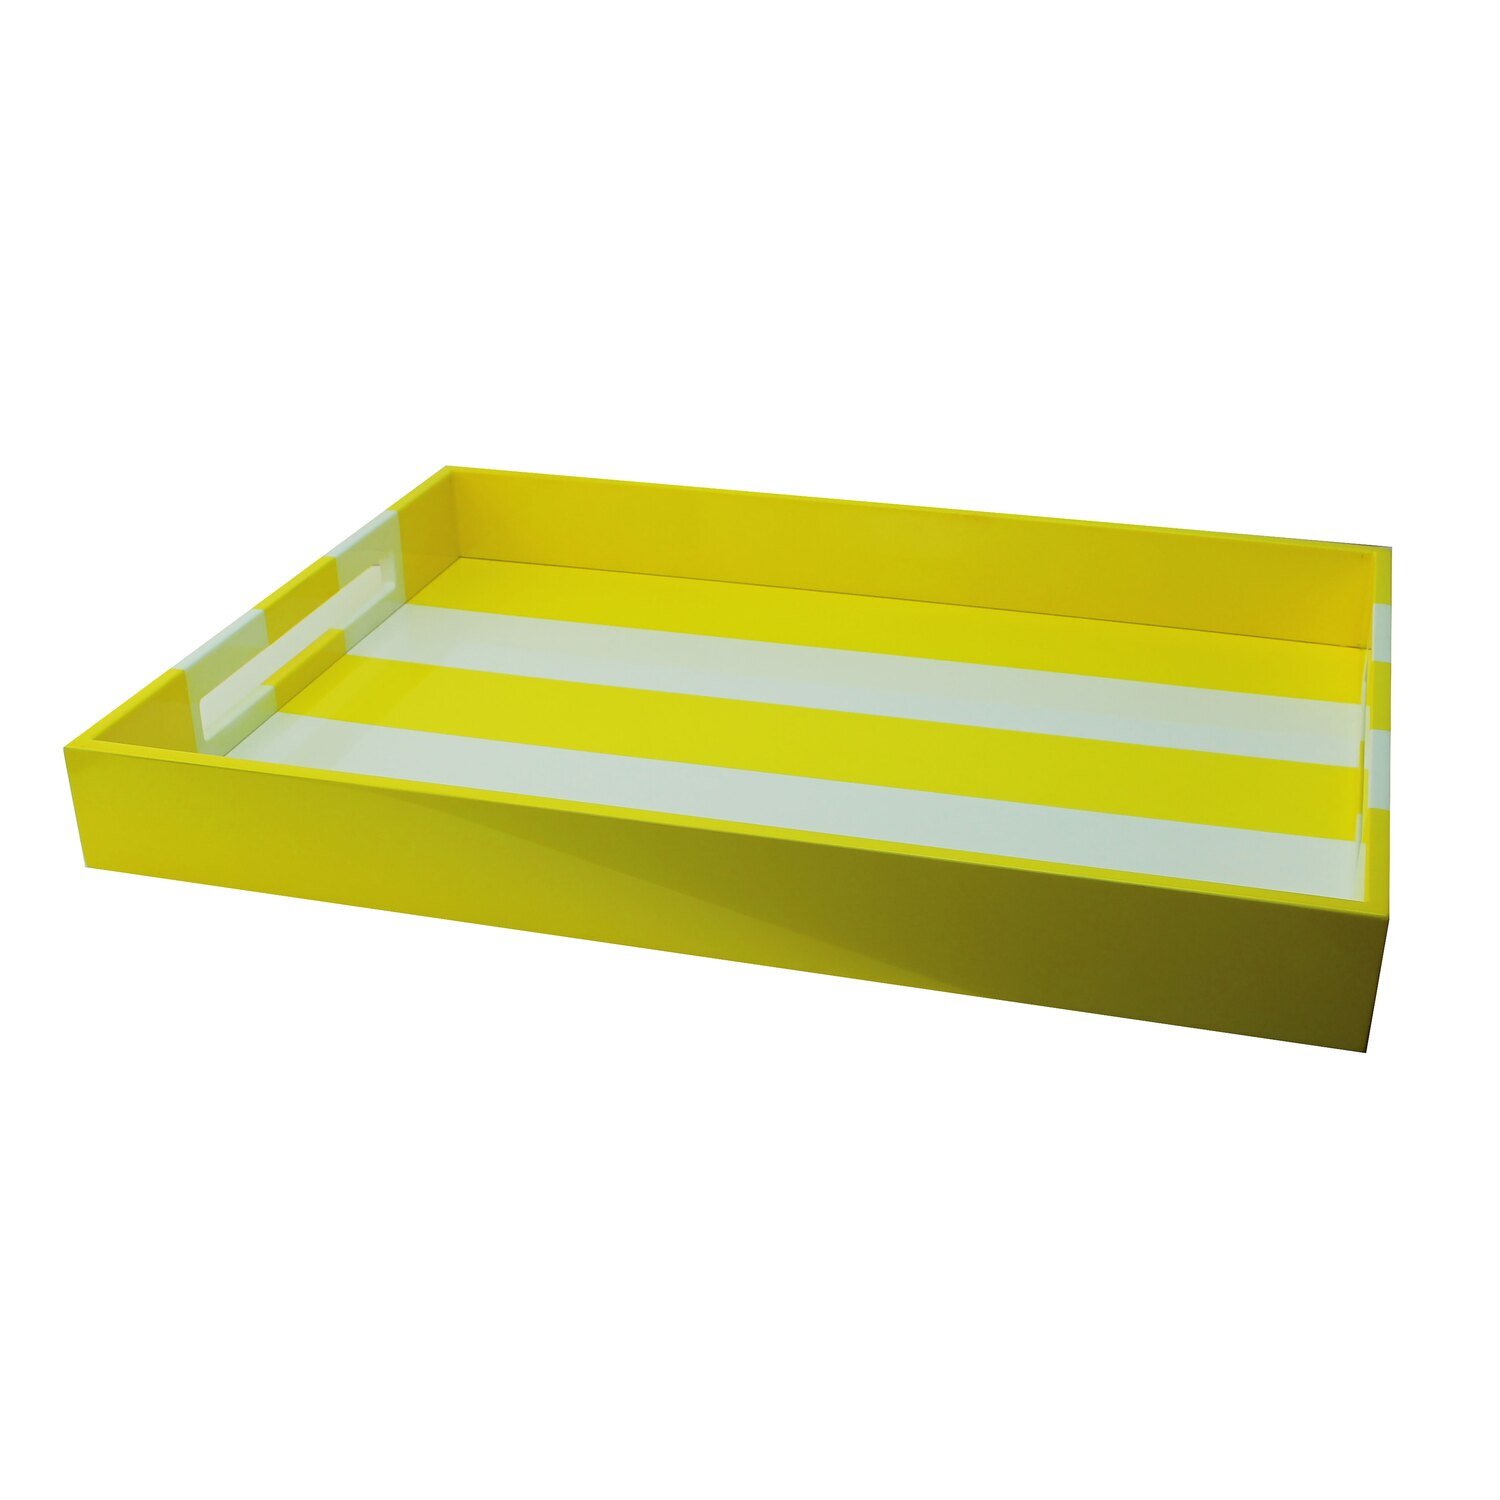 Addison Ross Yellow Striped Large Lacquered Ottoman Tray 22 x 16 Inch Lacquer TR3701